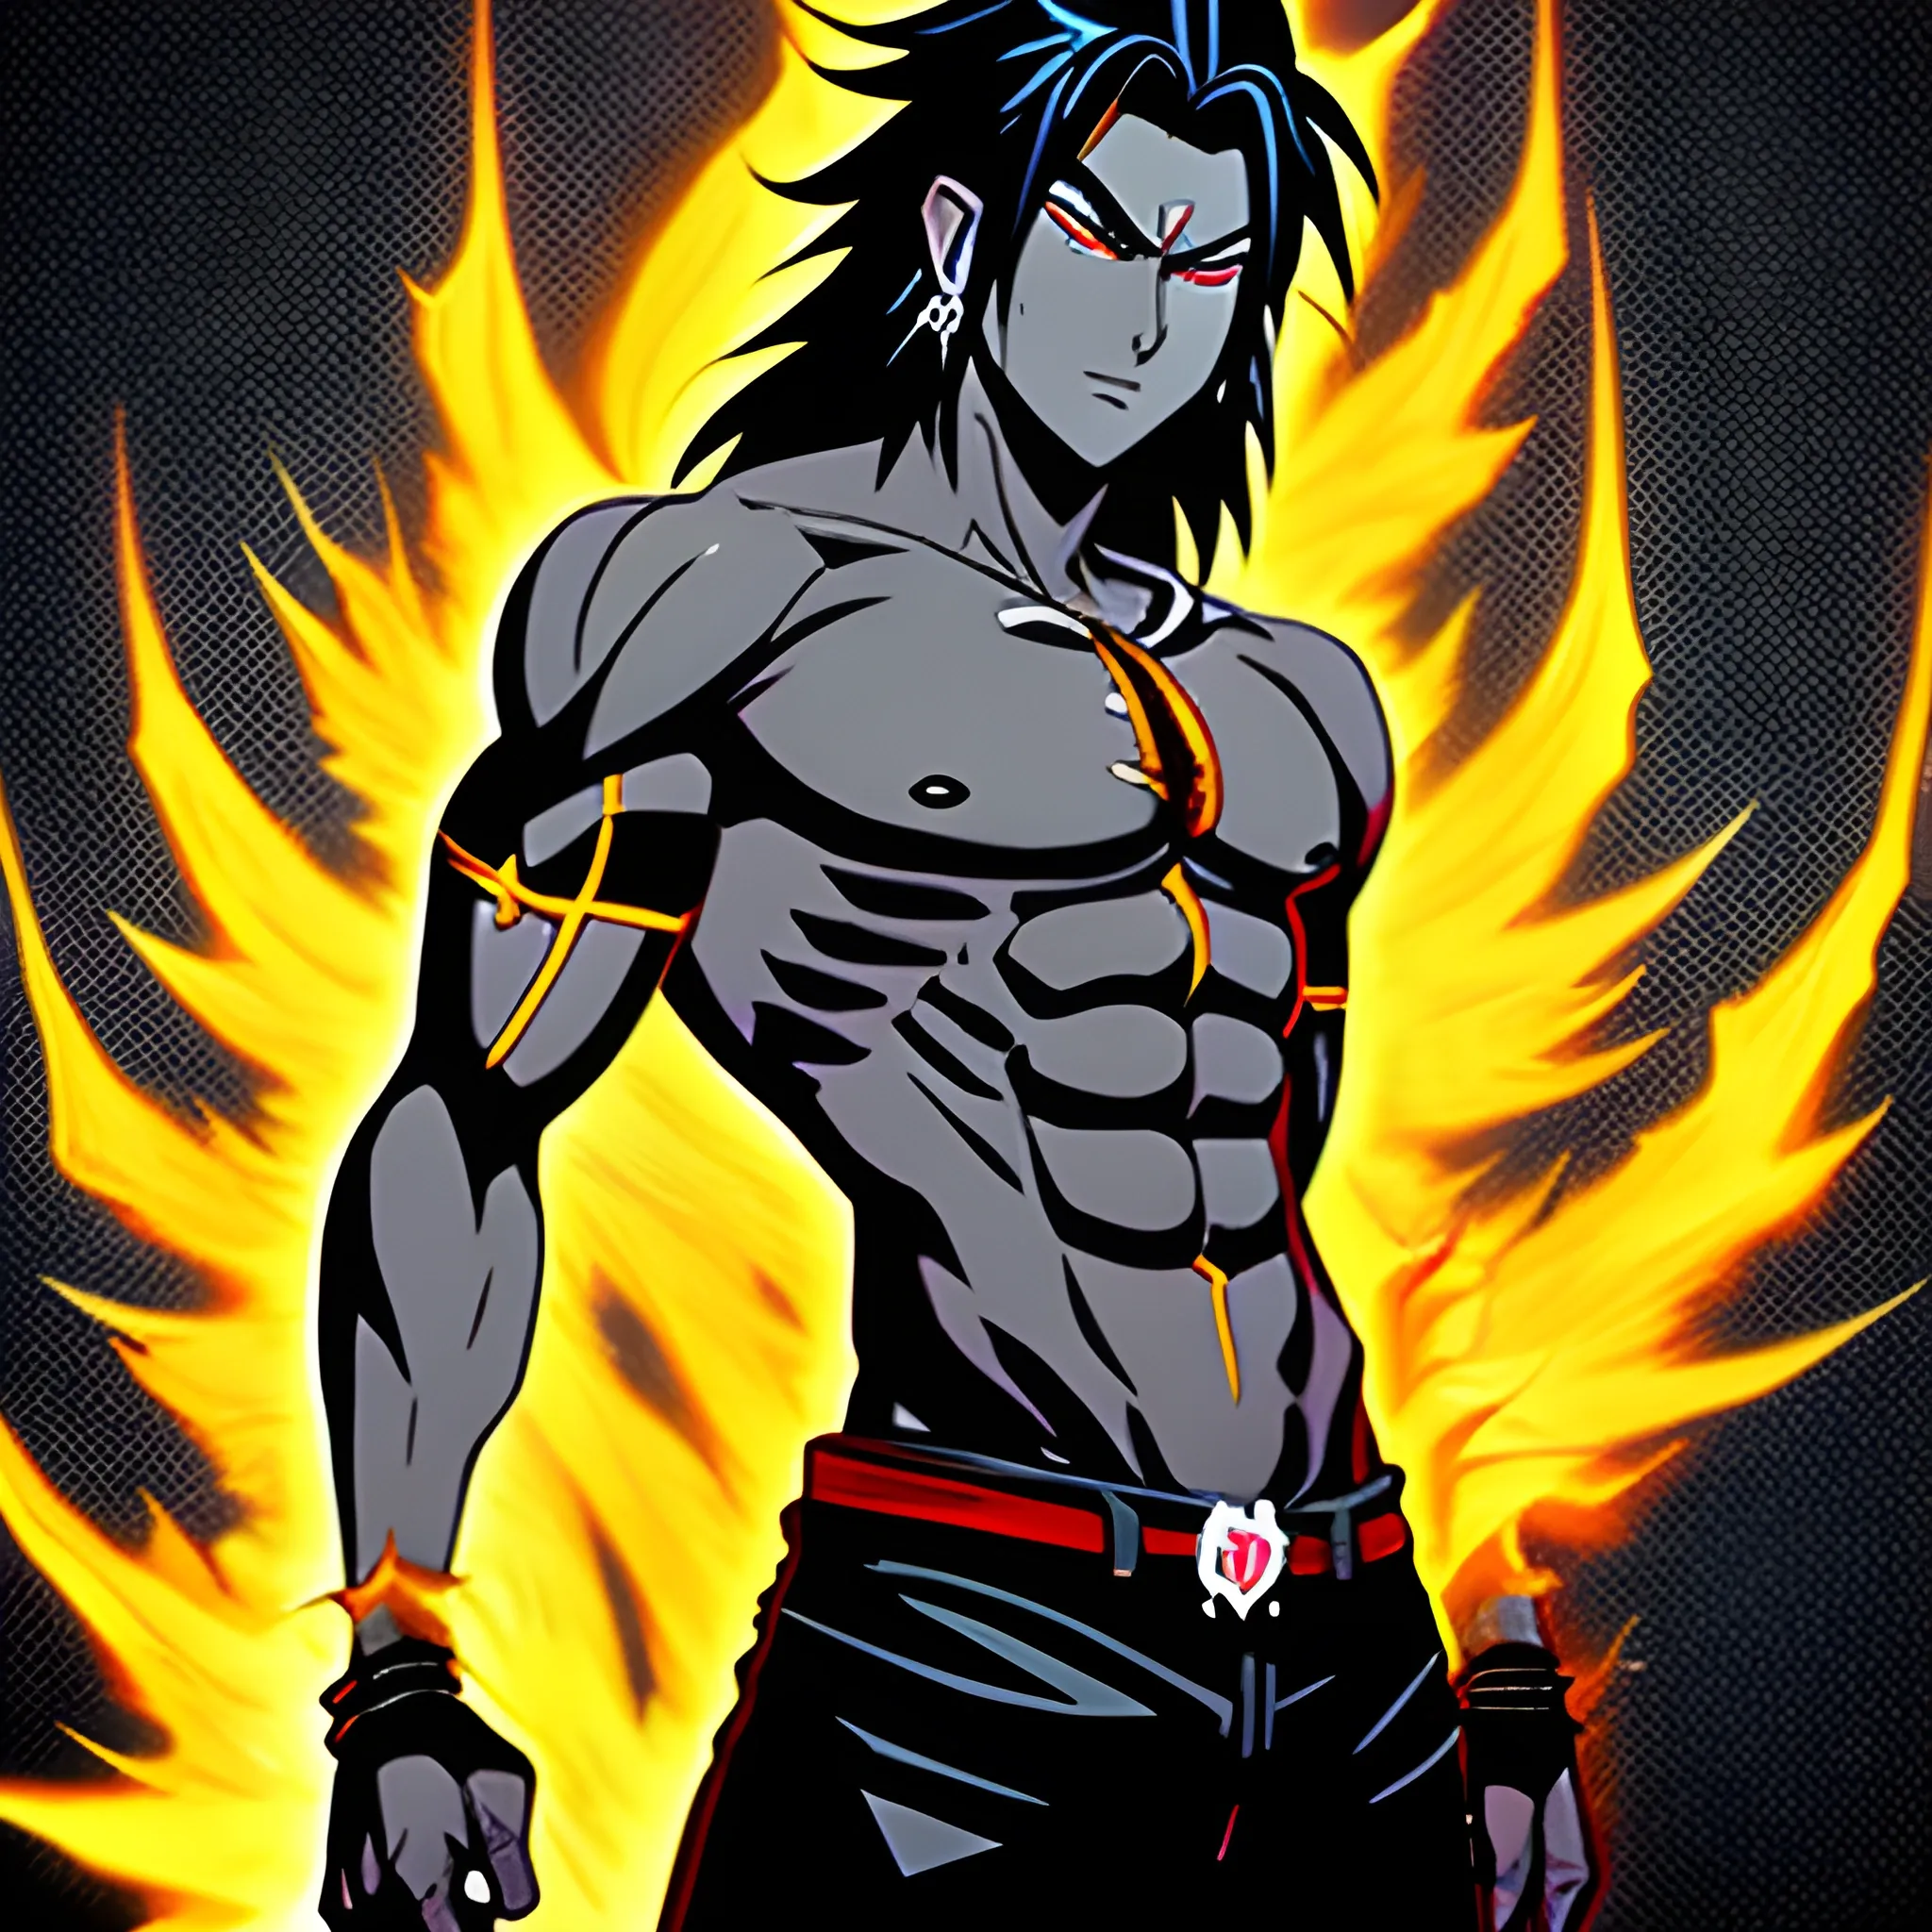 Anime style, male protegonist, black hair, blus flames, Indian, highschooler, Shiva, young, human.